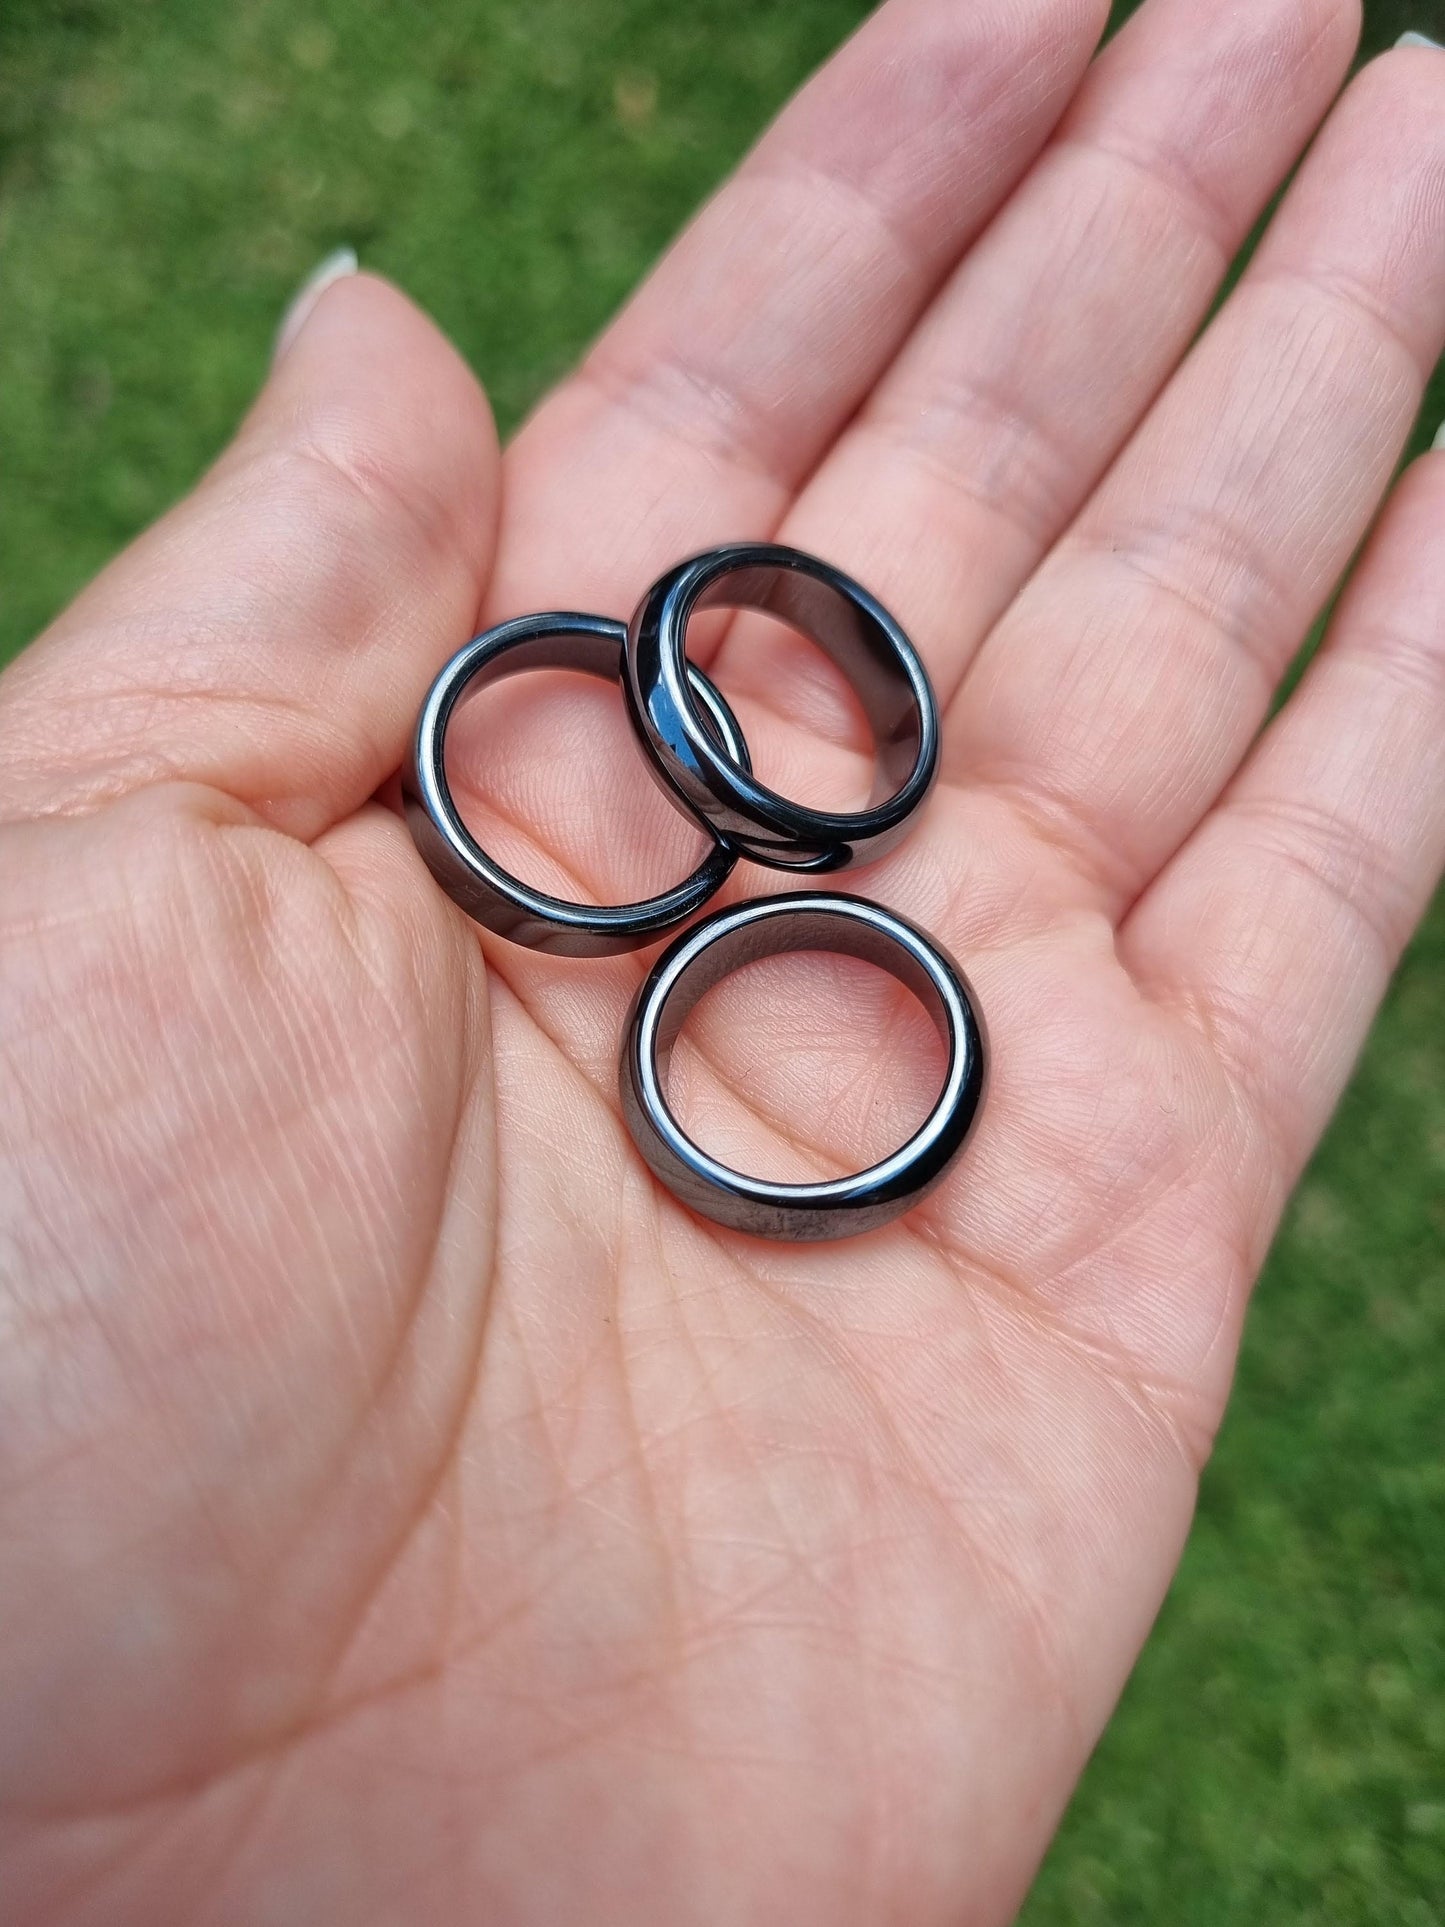 Hematite rings - The Protection stone